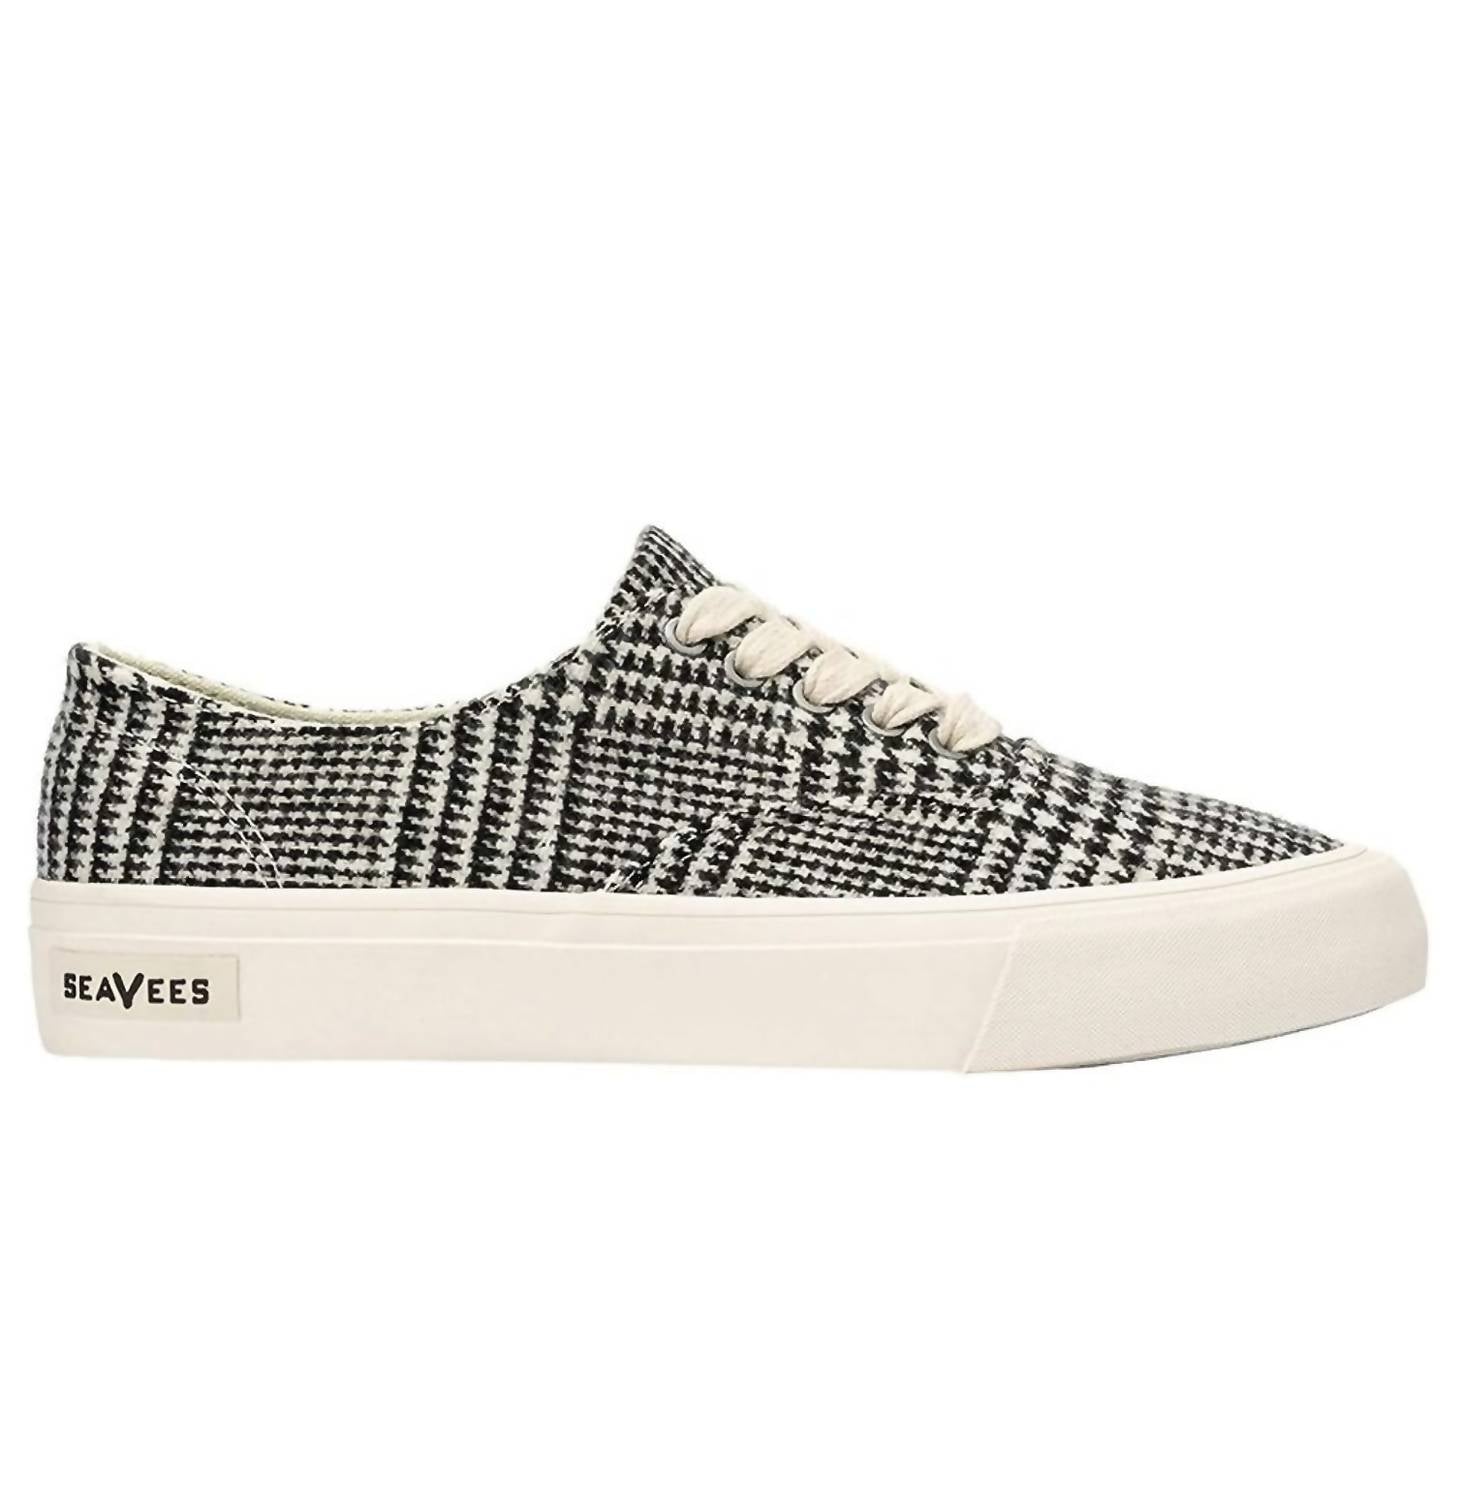 Shop Seavees Women's Legend Sneaker Highlands In Black/white Woven Houndstooth